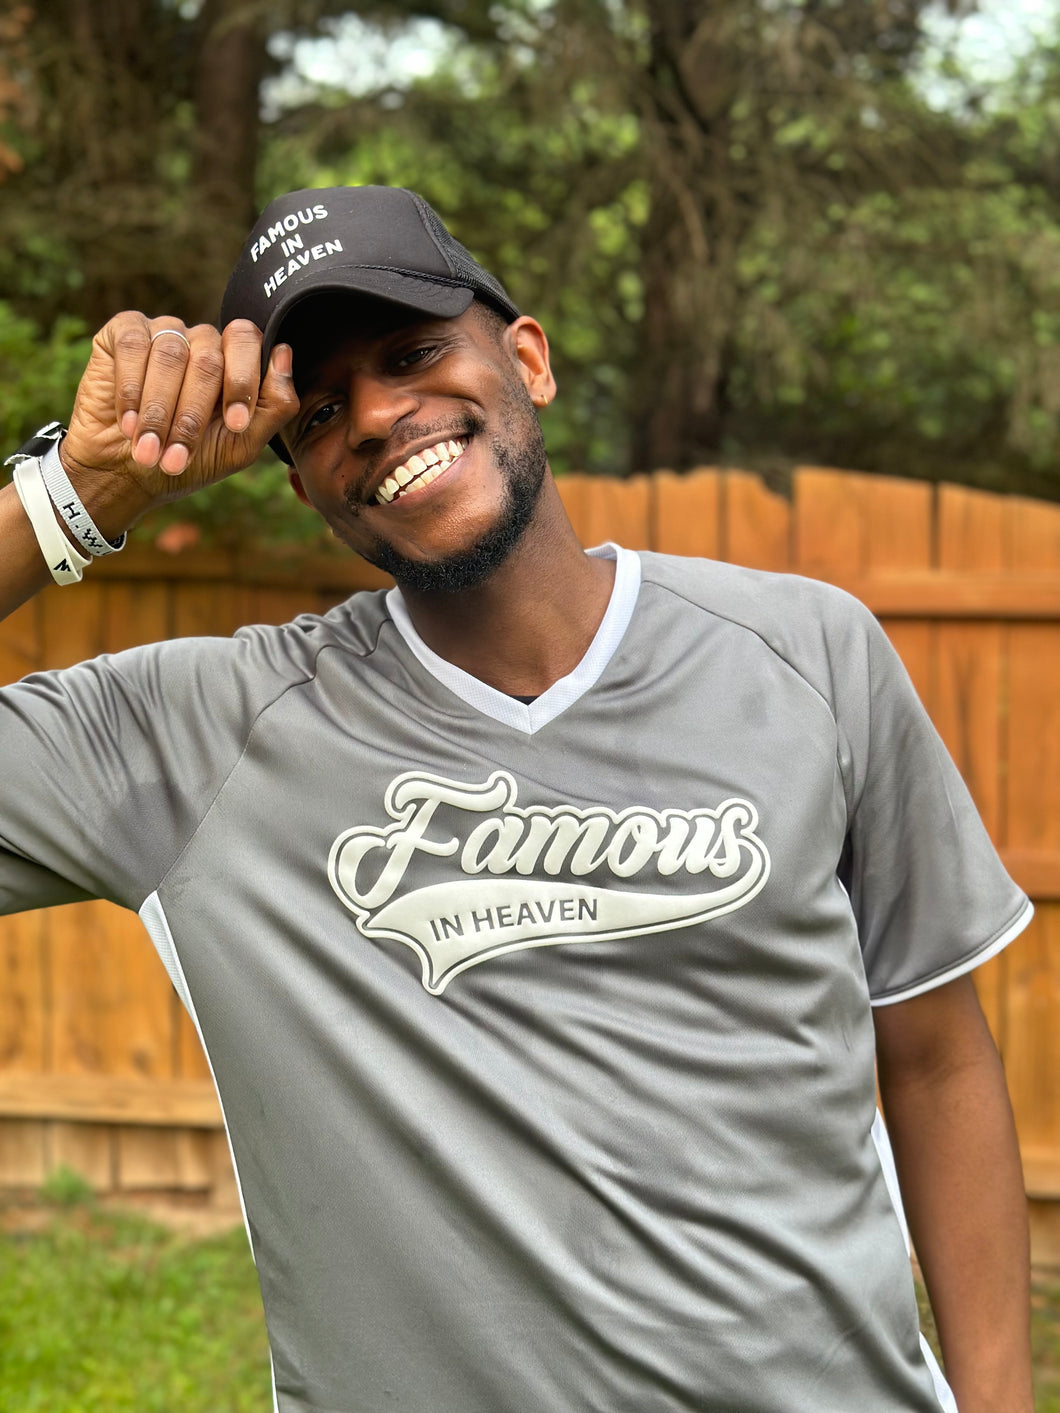 Famous in Heaven - All Star Jersey (Grey/White)